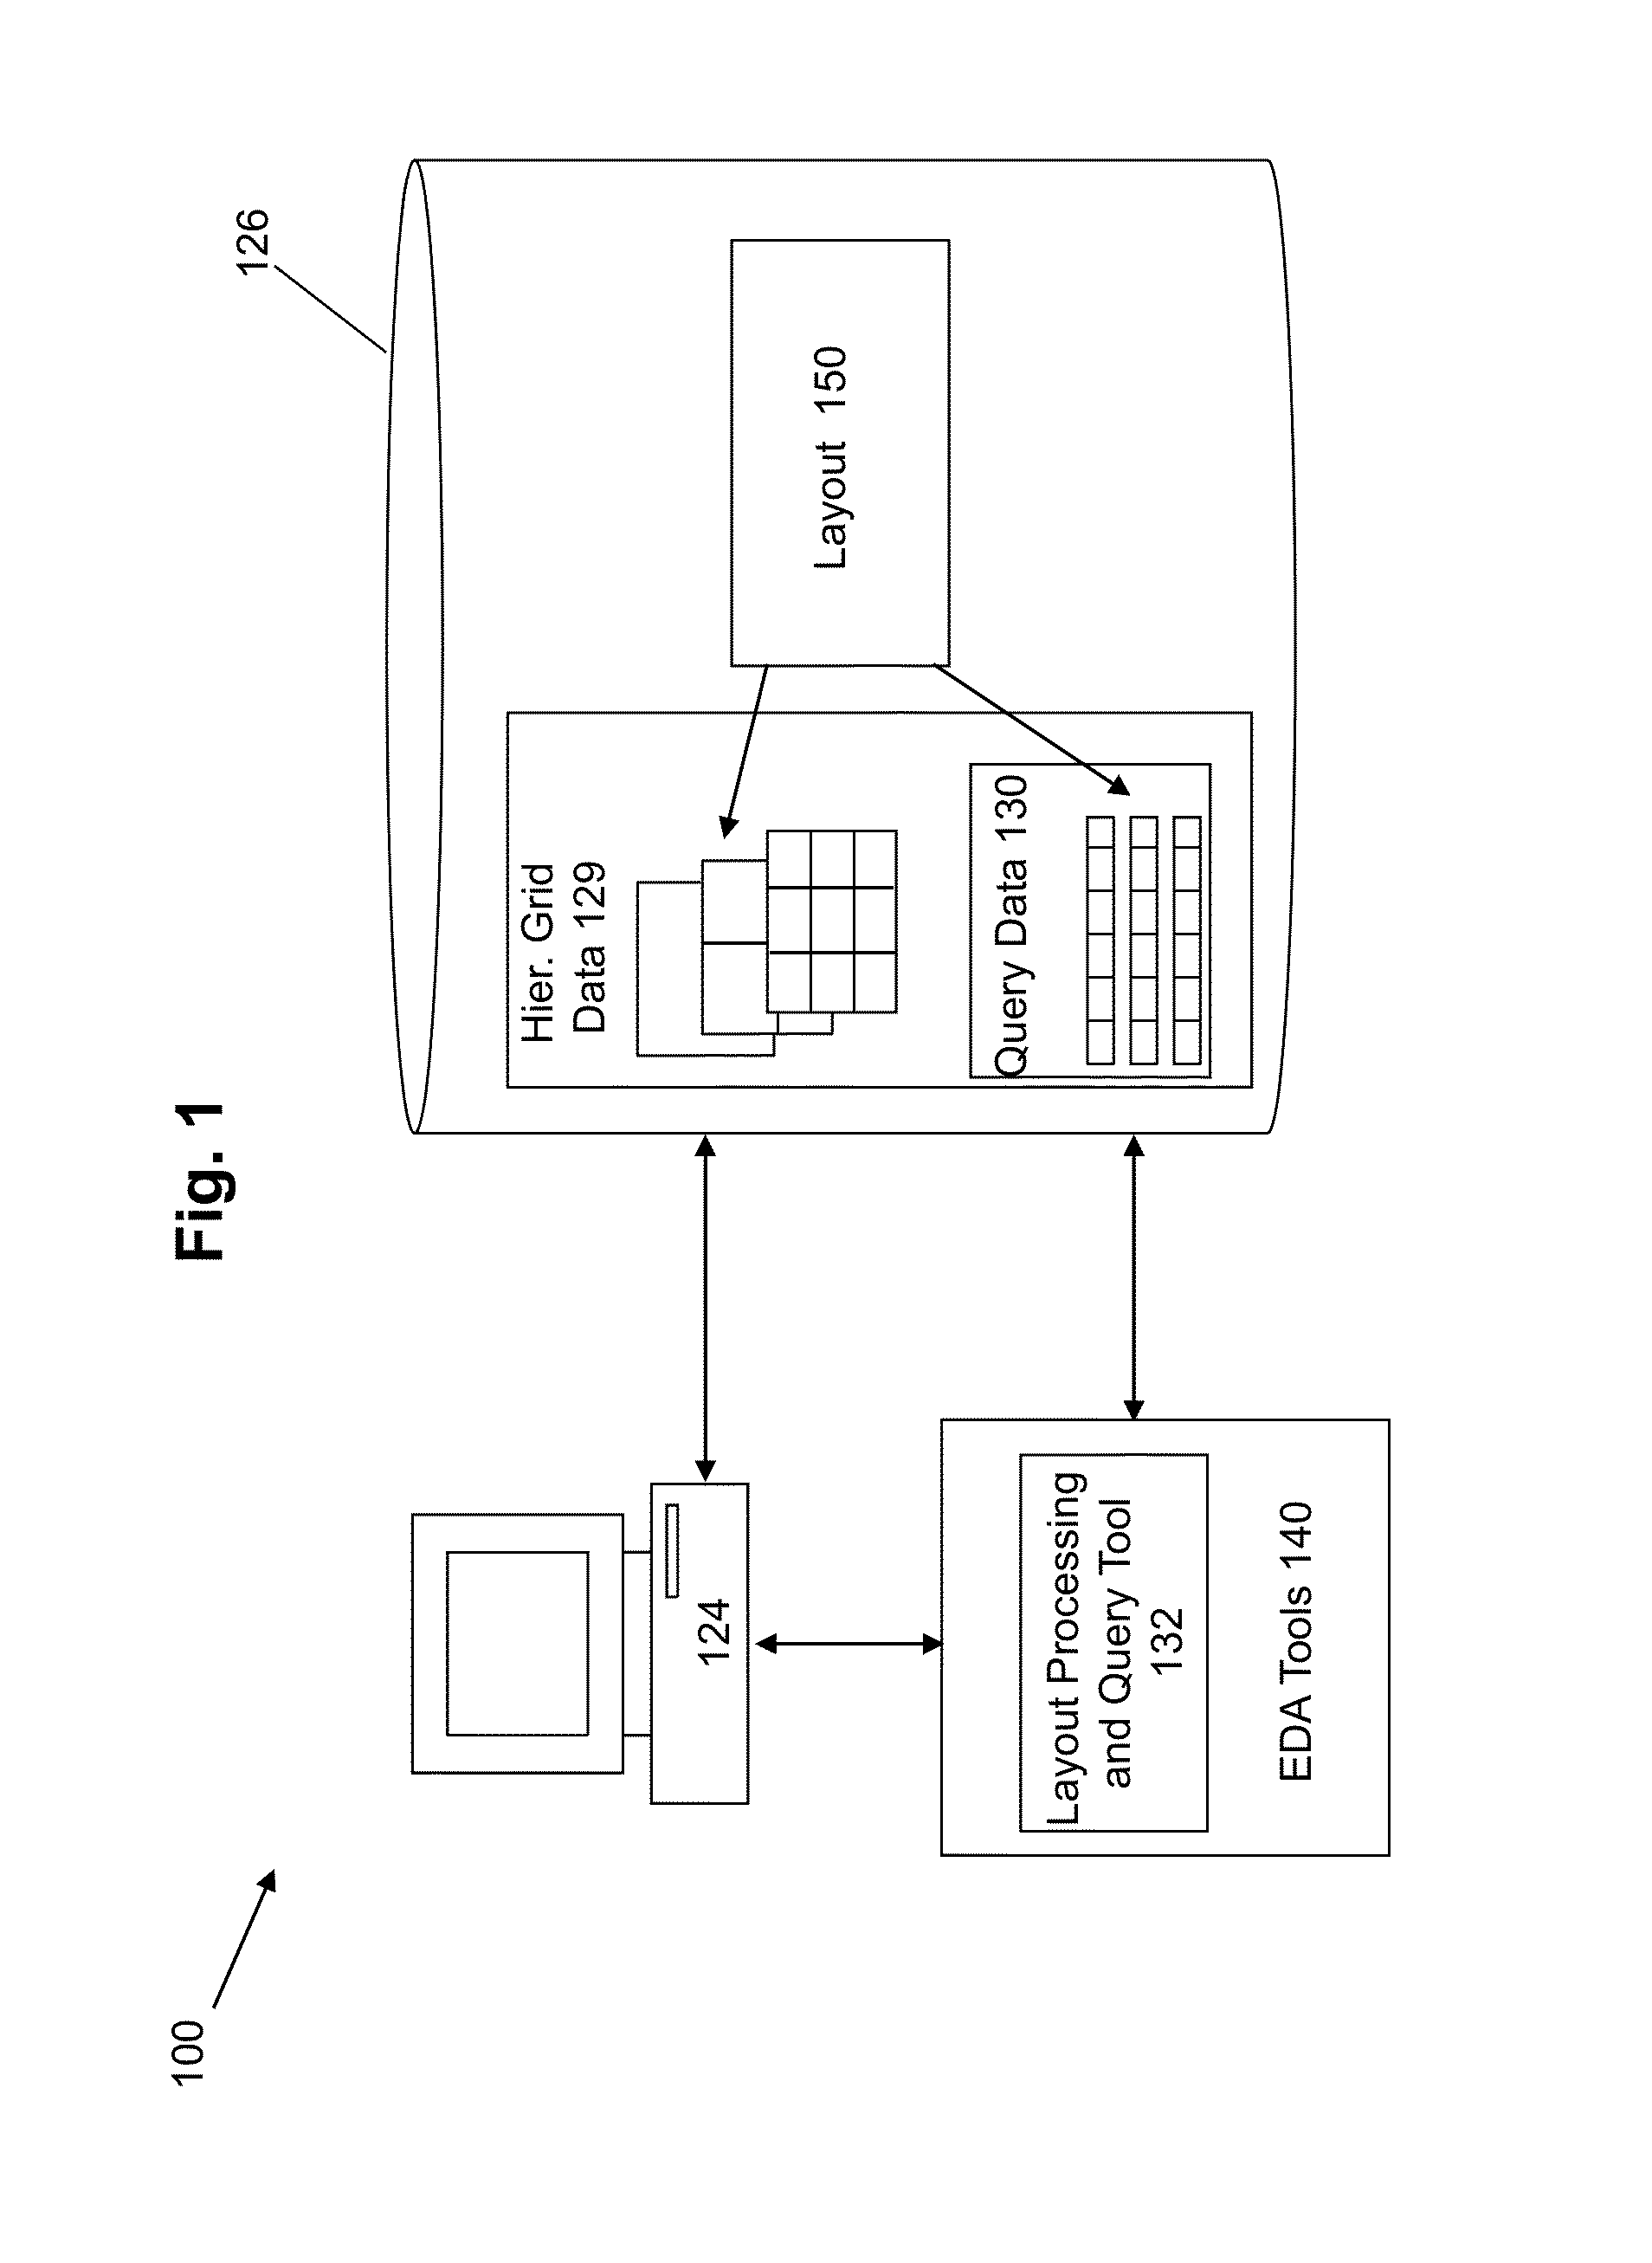 Method and mechanism for performing region query using hierarchical grids